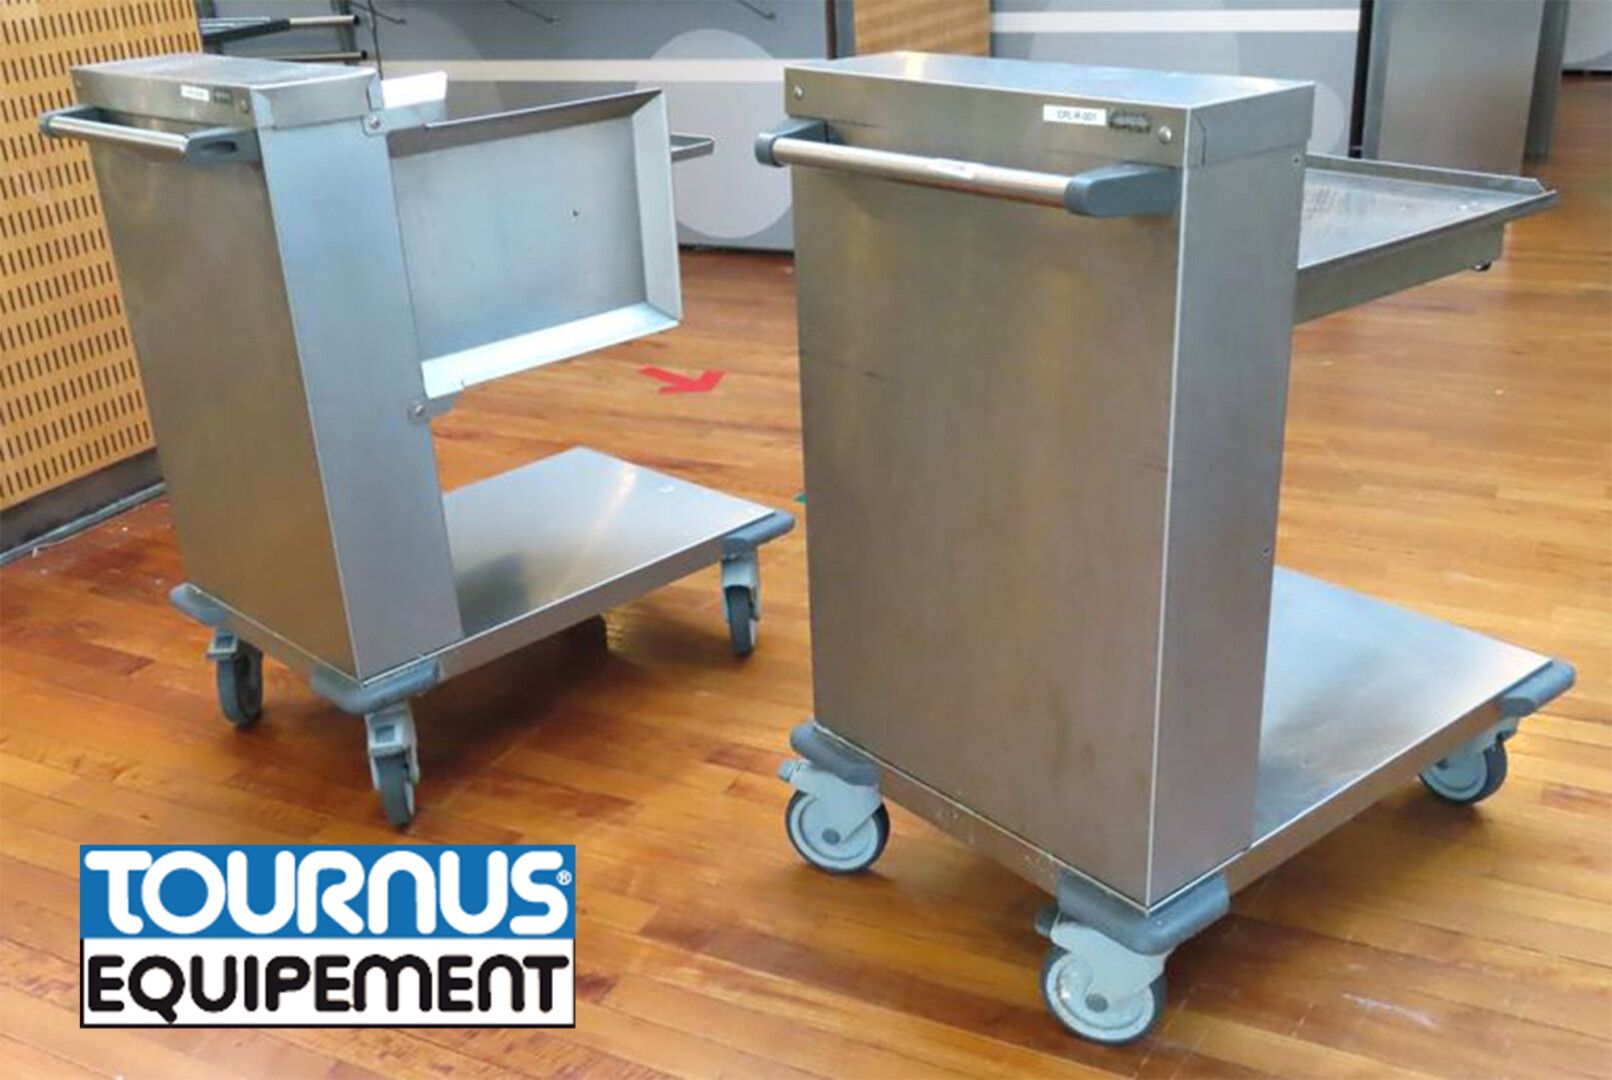 Null 2 STAINLESS STEEL TRAY TROLLEYS WITH CONSTANT LEVEL, BRAND TOURNUS EQUIPMEN&hellip;